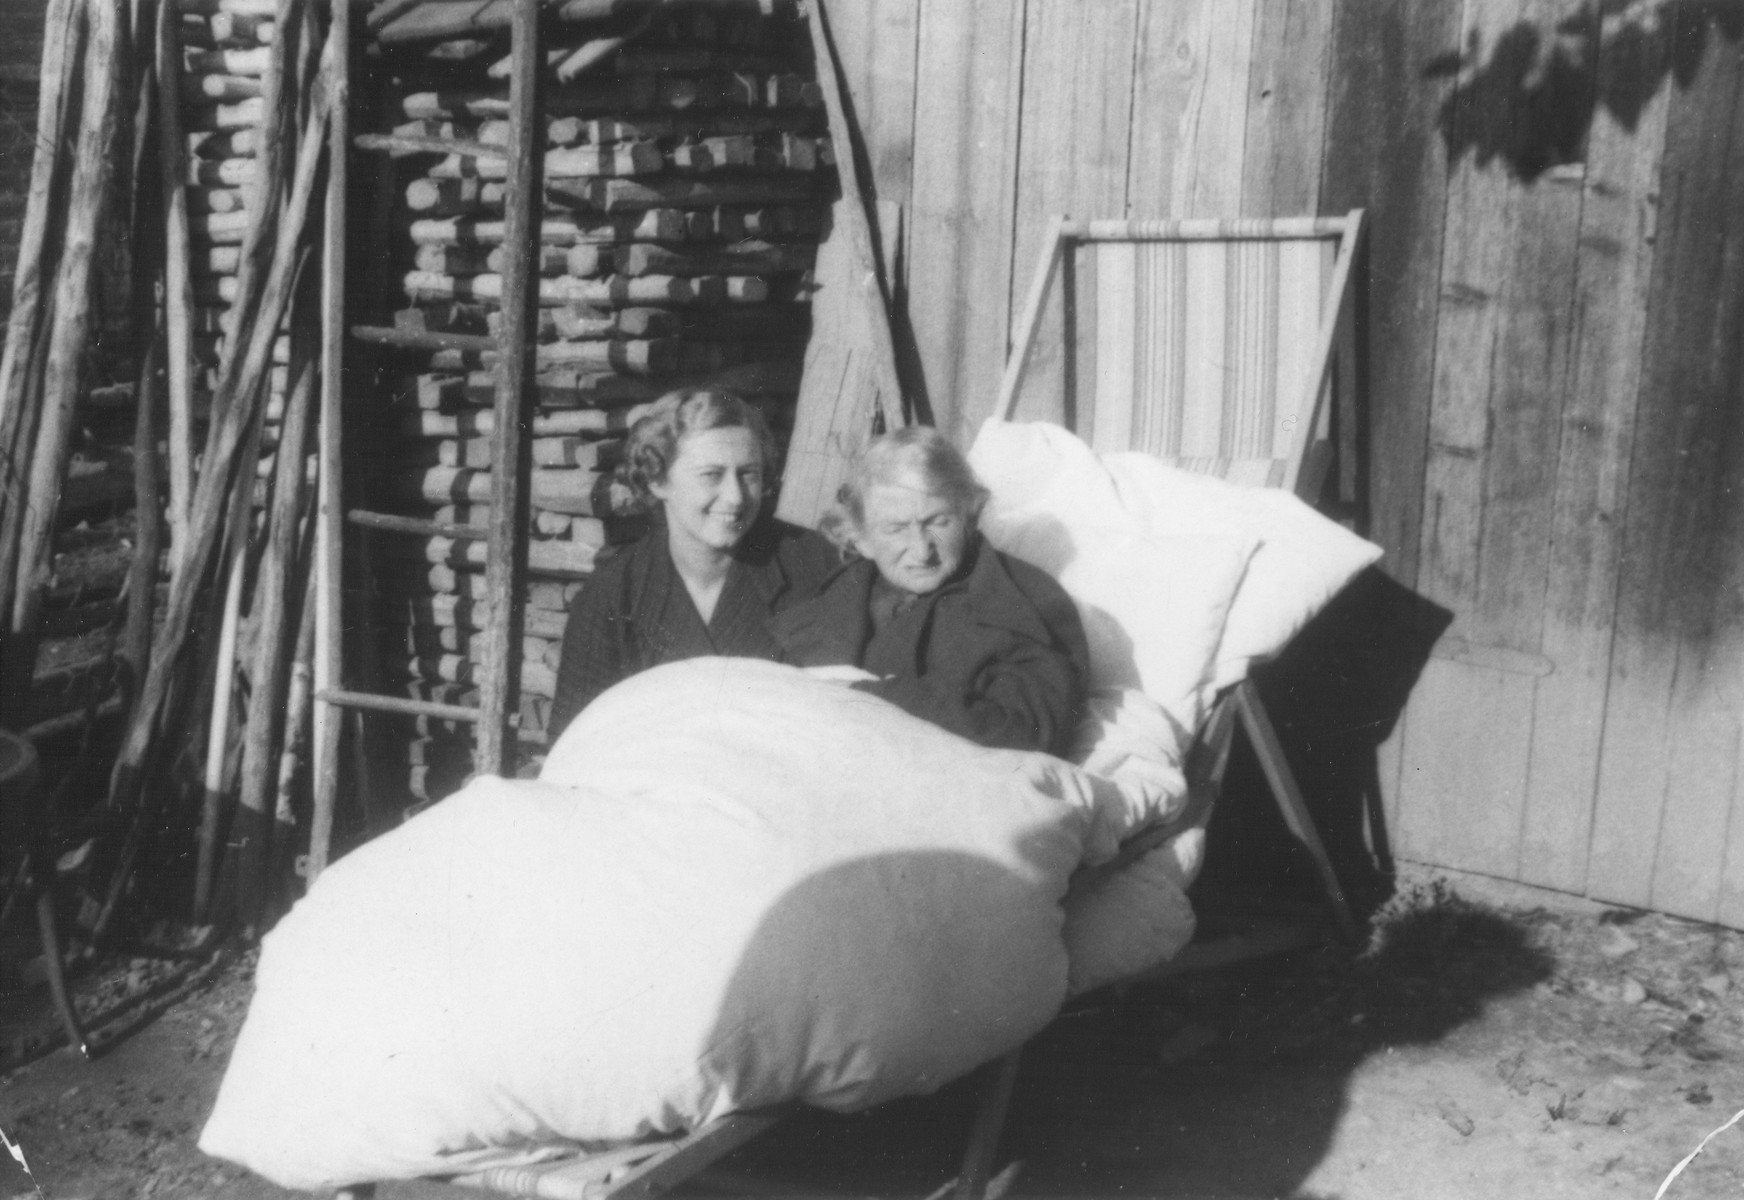 Lili Koenig poses next to her mother Sari Vermes who is sitting outside bundled up in comforters and pillows.